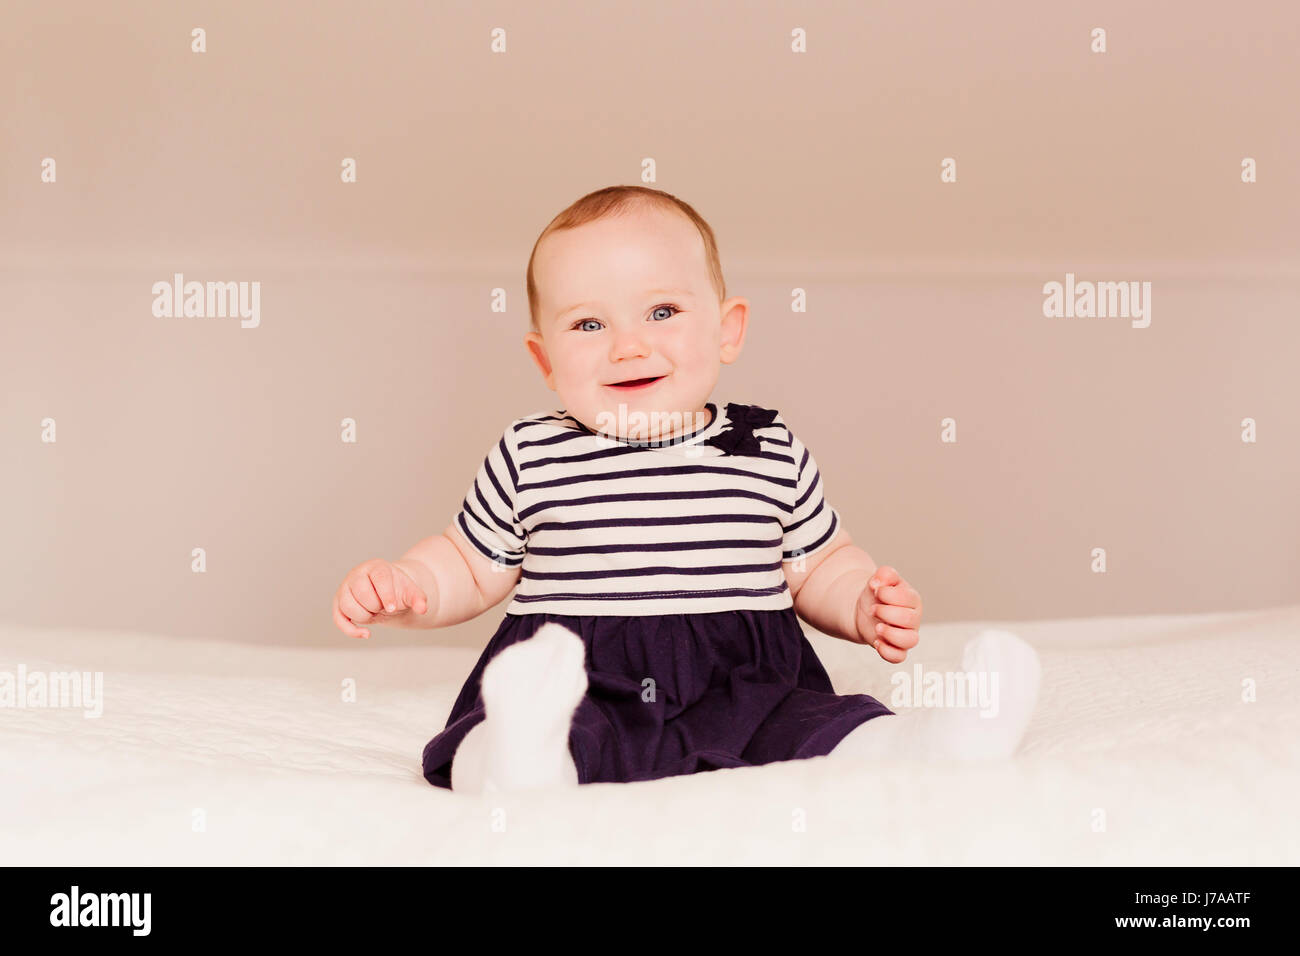 Portrait of smiling baby girl sitting on bed Banque D'Images